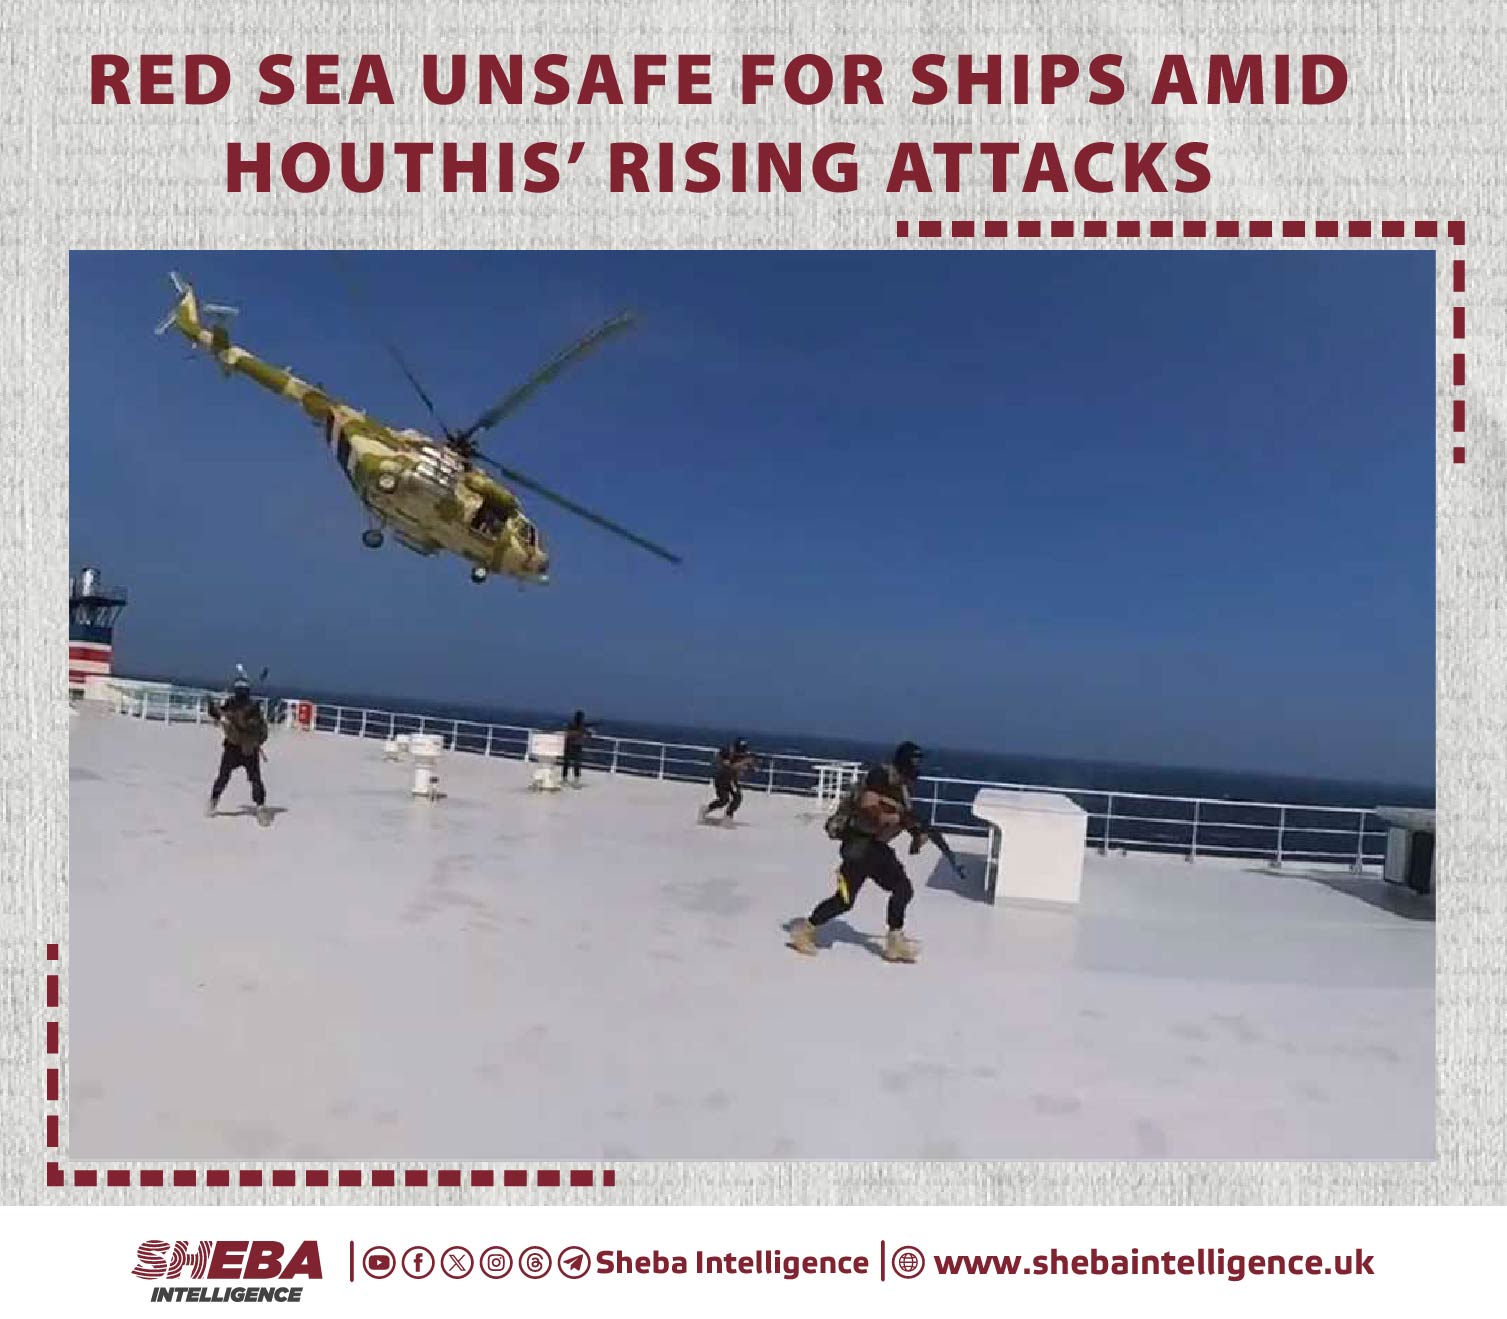 Red Sea Unsafe for Ships Amid Houthis’ Rising Attacks